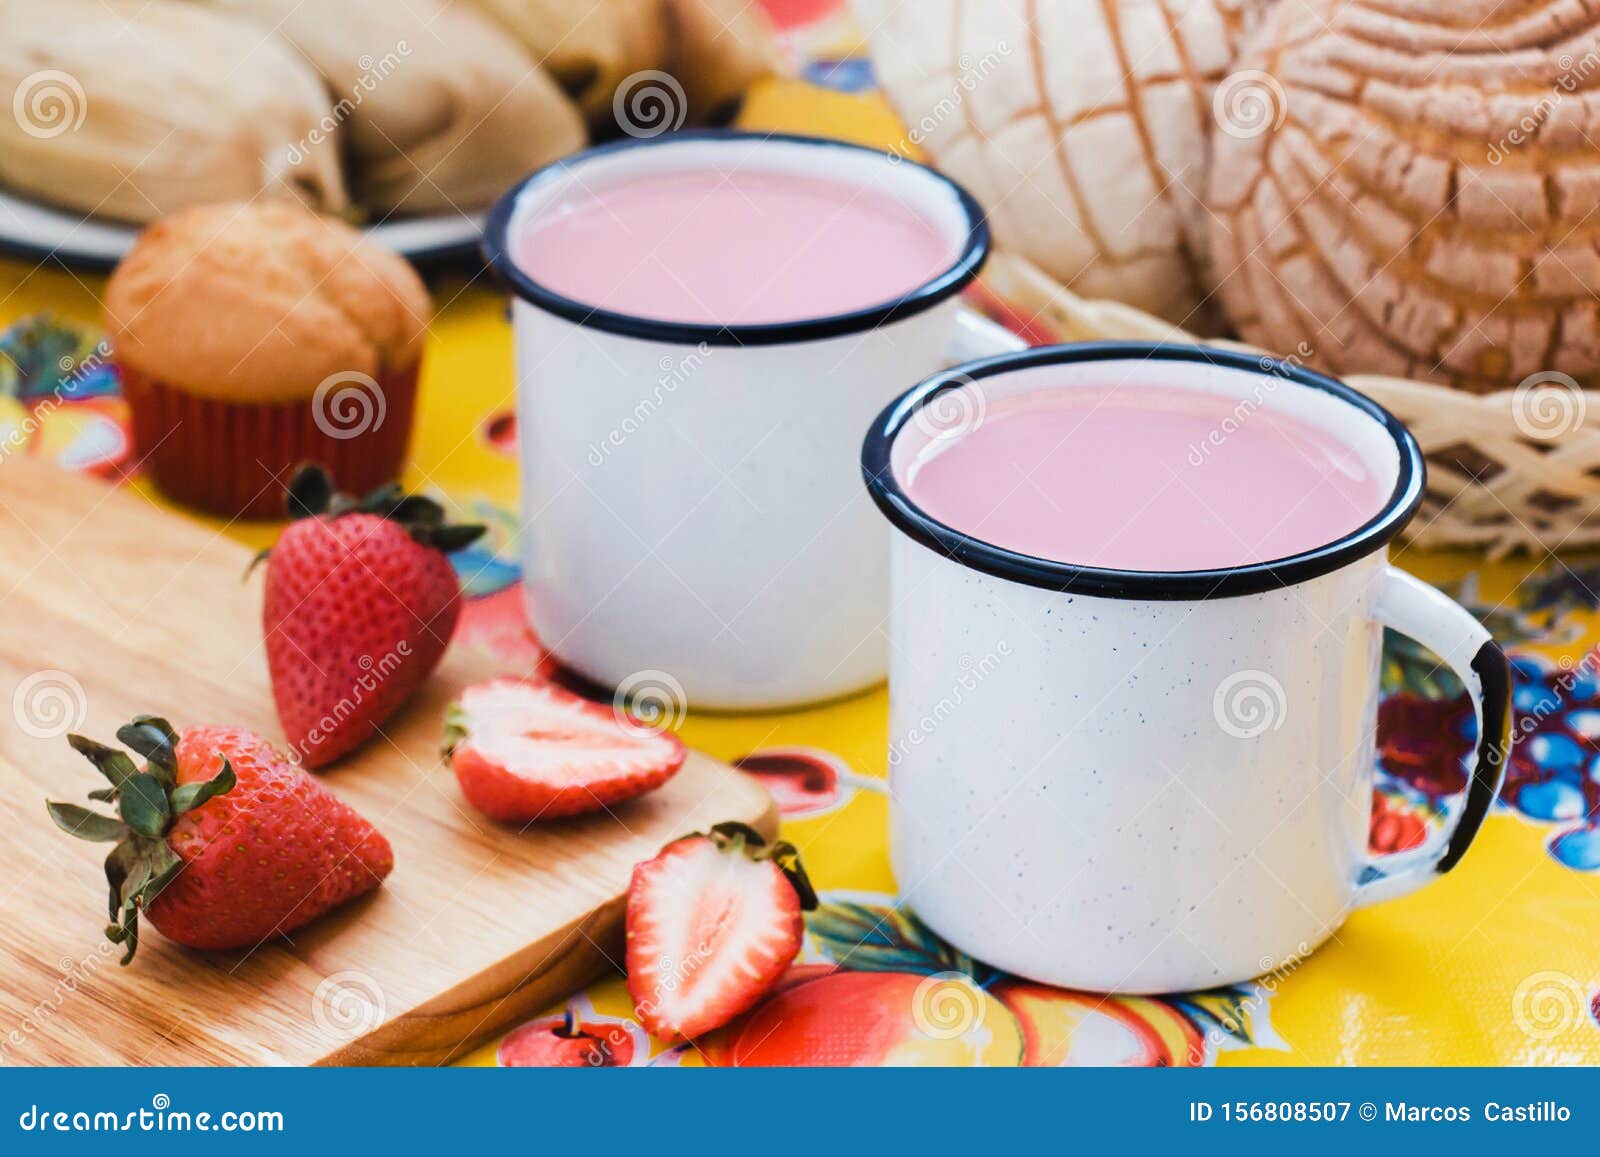 atole de fresa, mexican traditional beverage and bread, made with cinnamon and strawberries in mexico